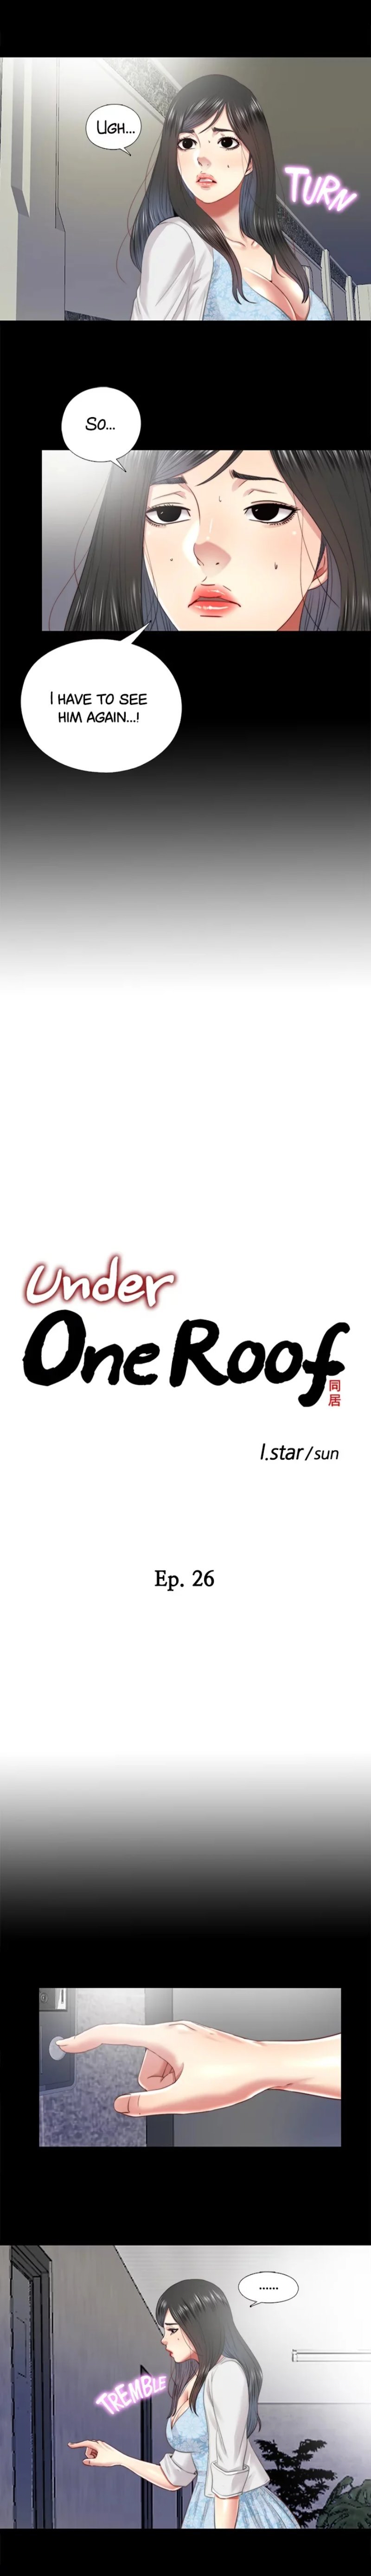 under-one-roof-chap-26-1